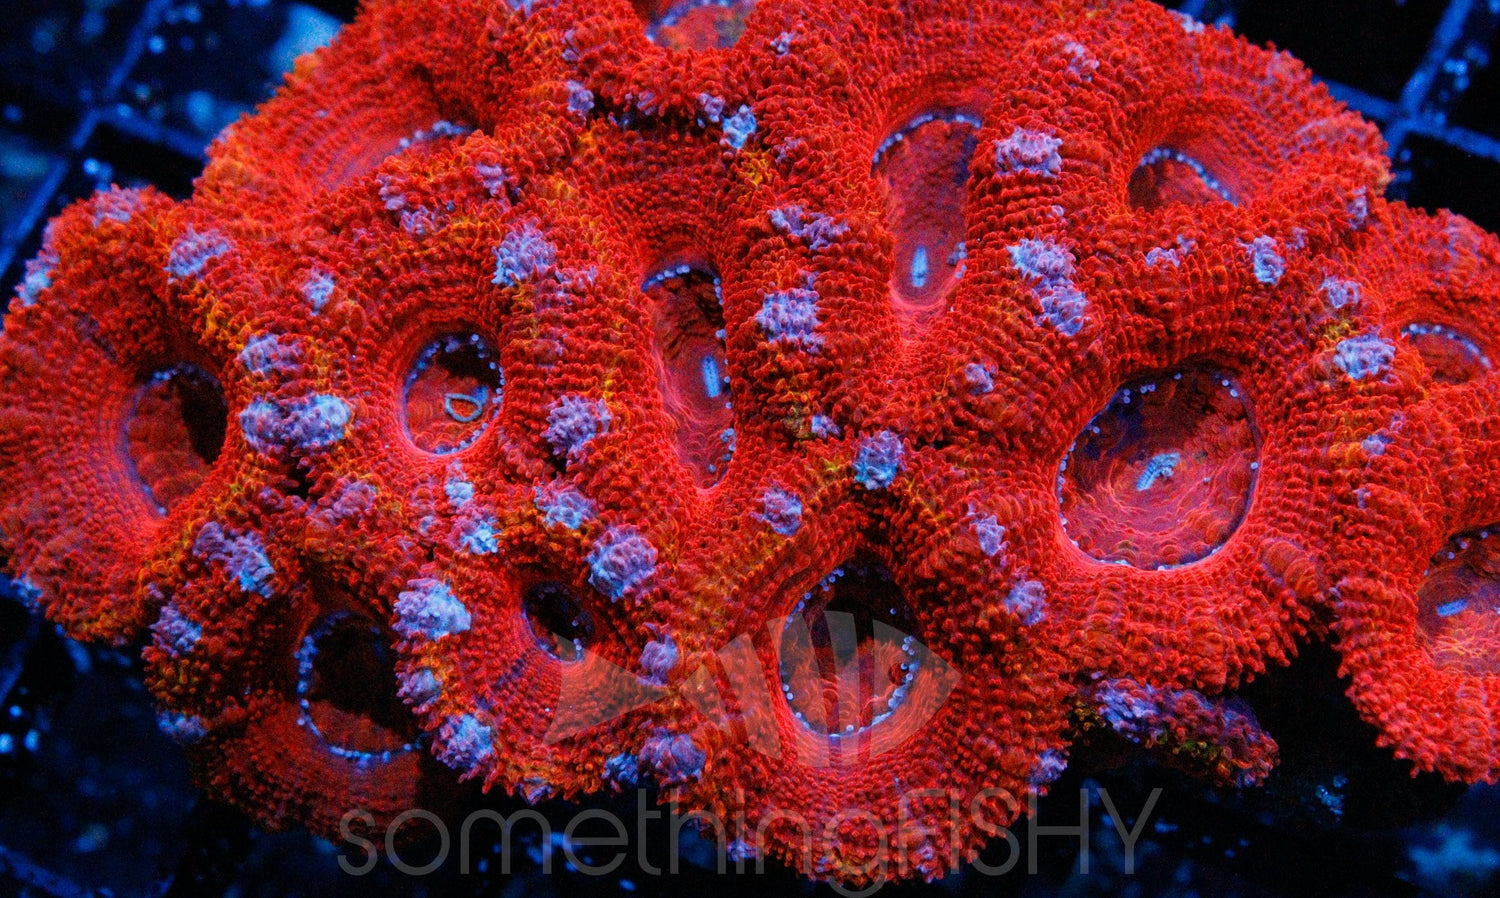 Ultra Red Acan LPS